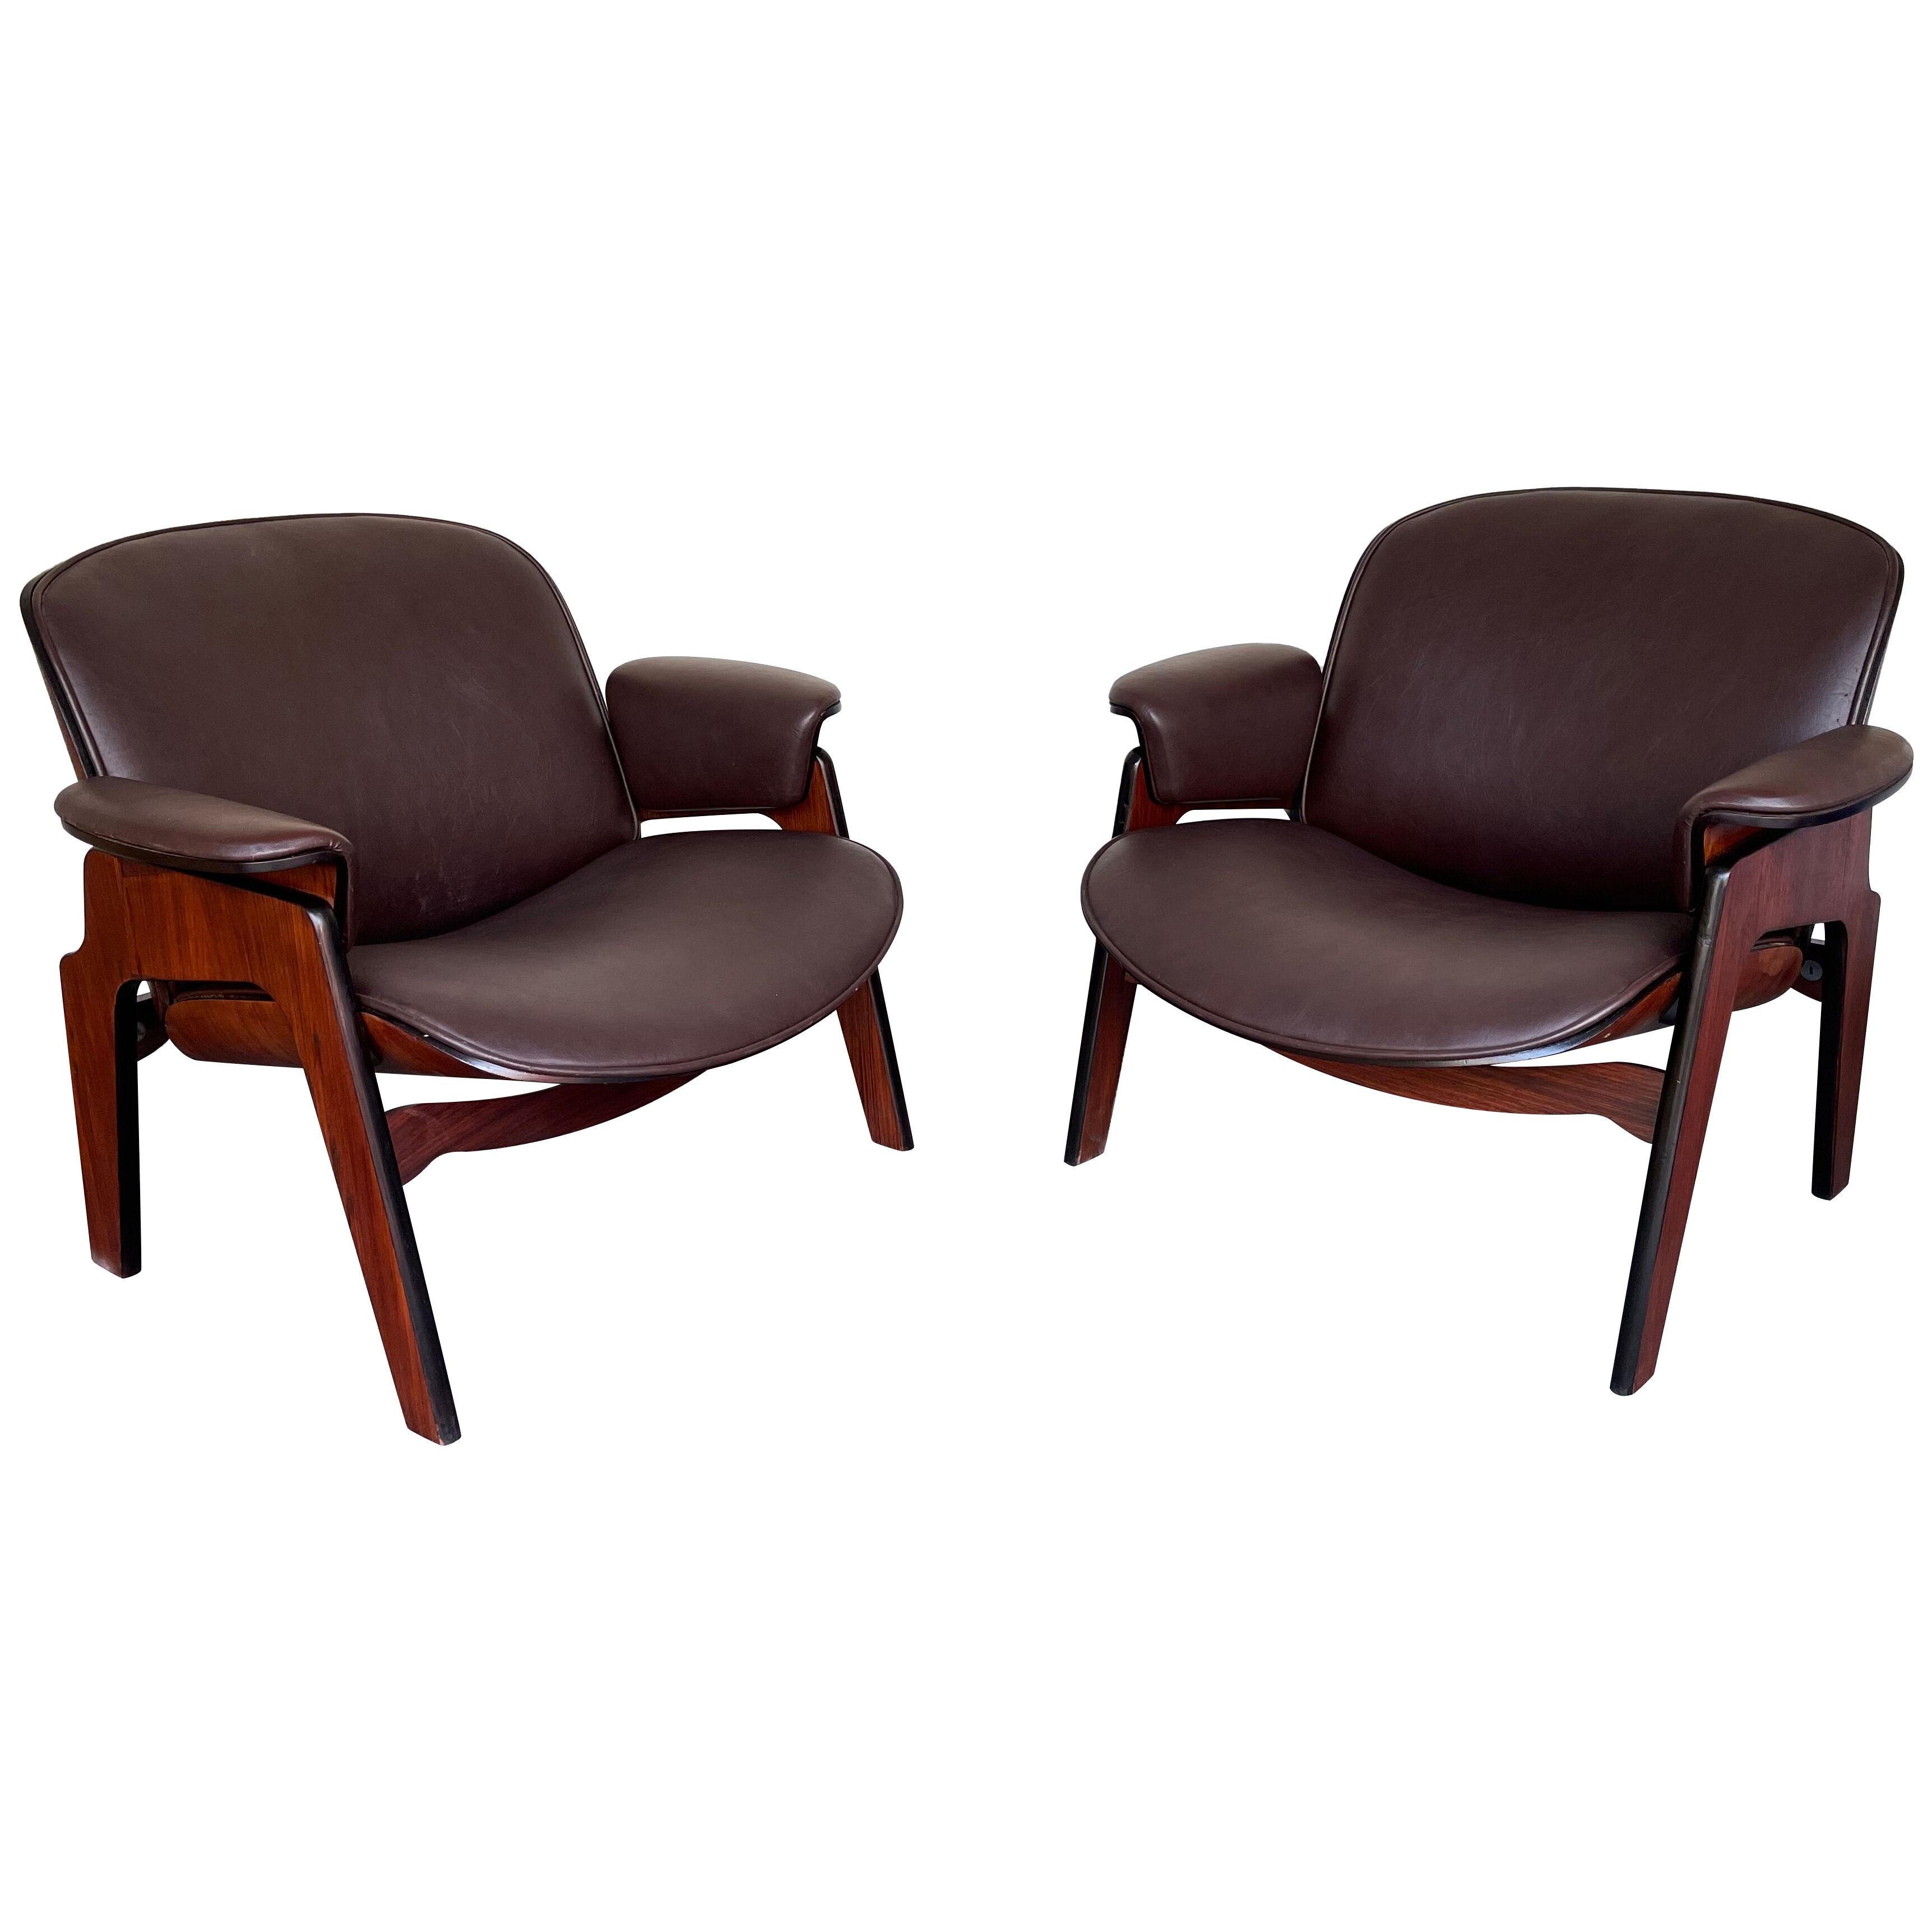 Pair of Wood Armchairs by Ico Parisi for MIM Roma. Italy, 1960s